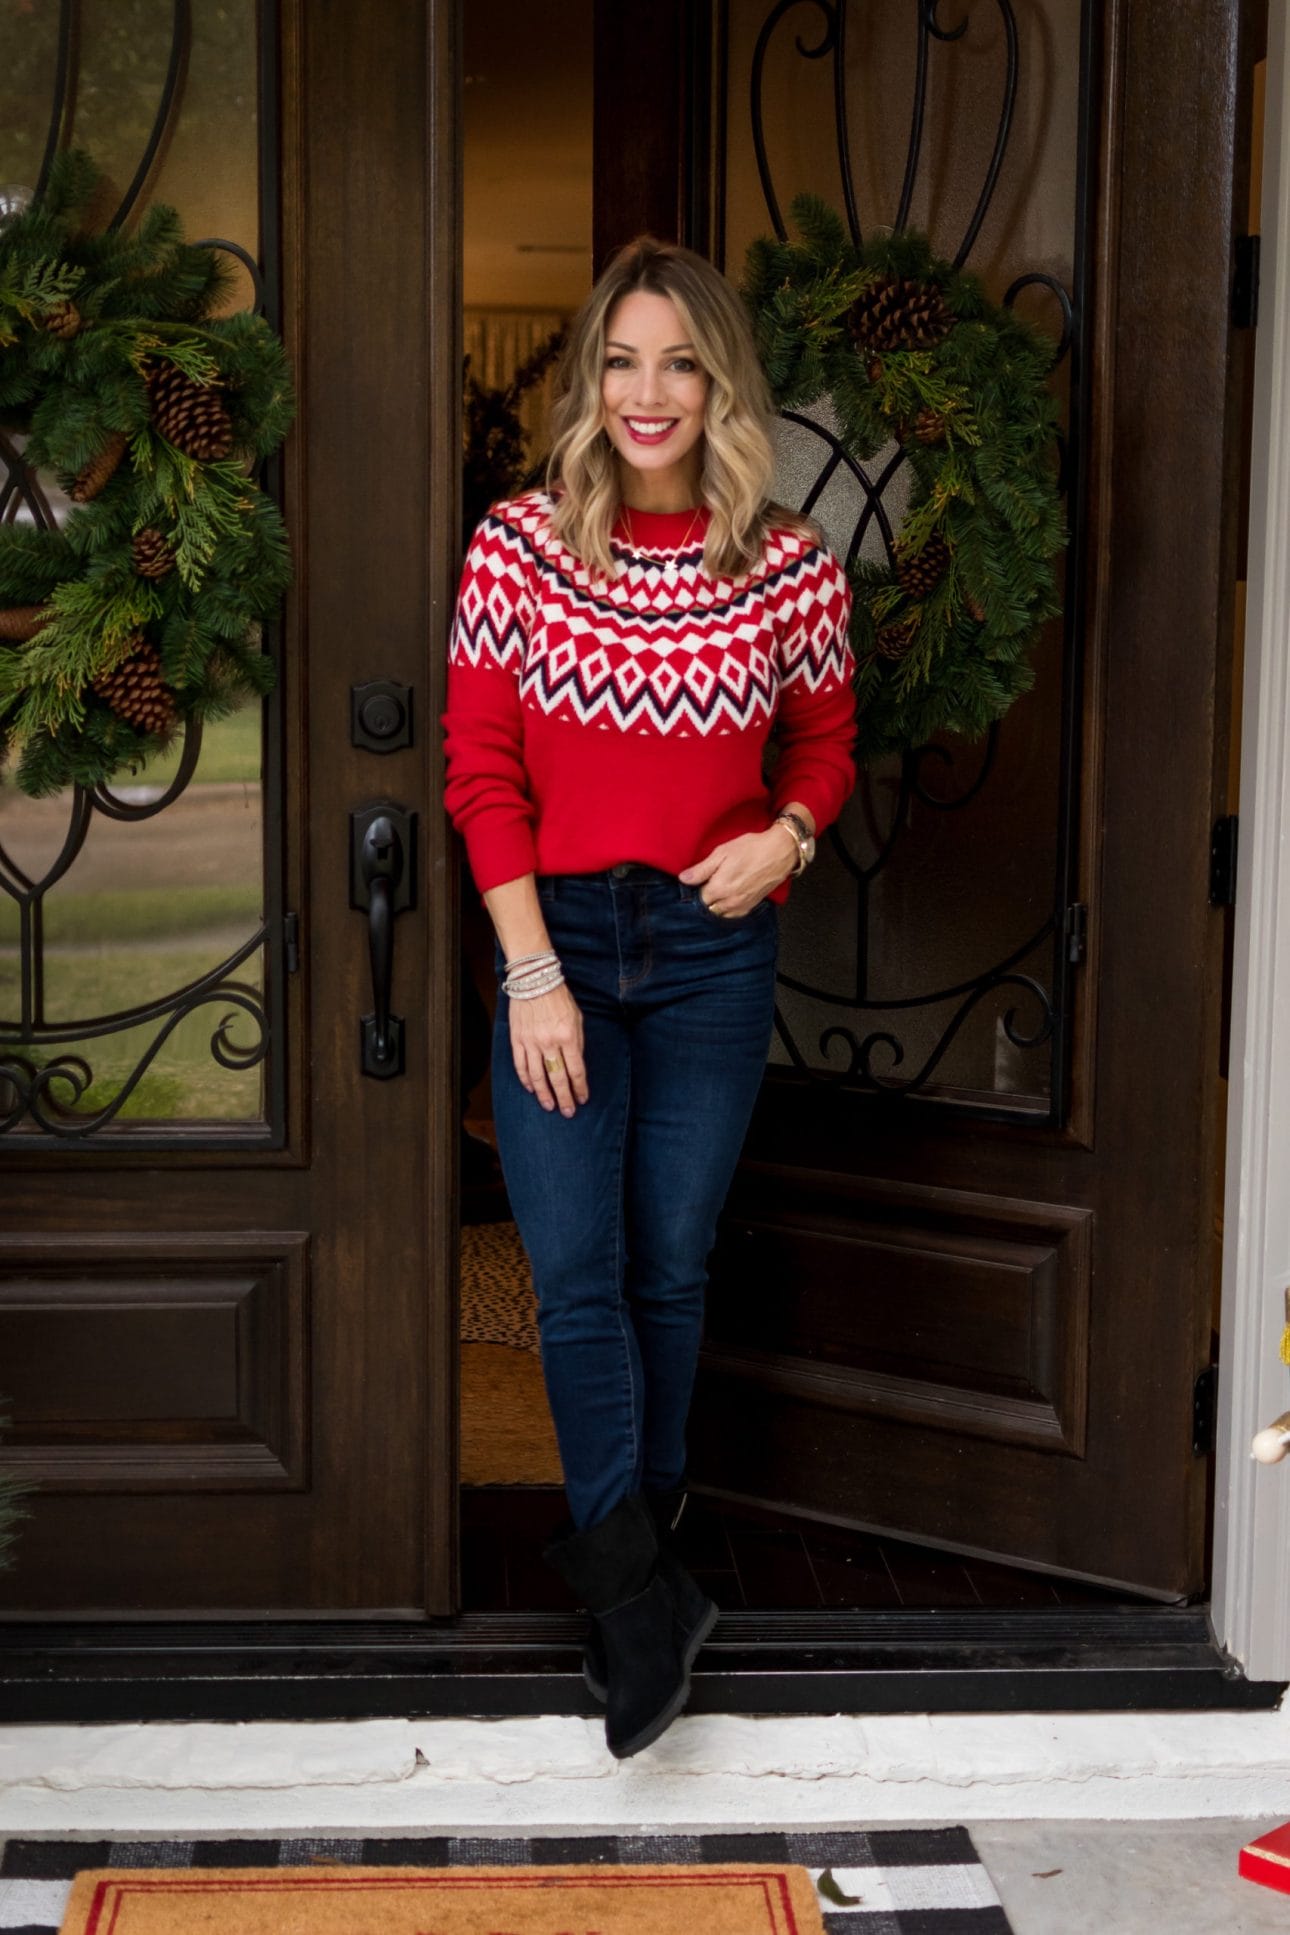 Christmas Home Tour, Fair Isle Sweater, Jeans, Booties